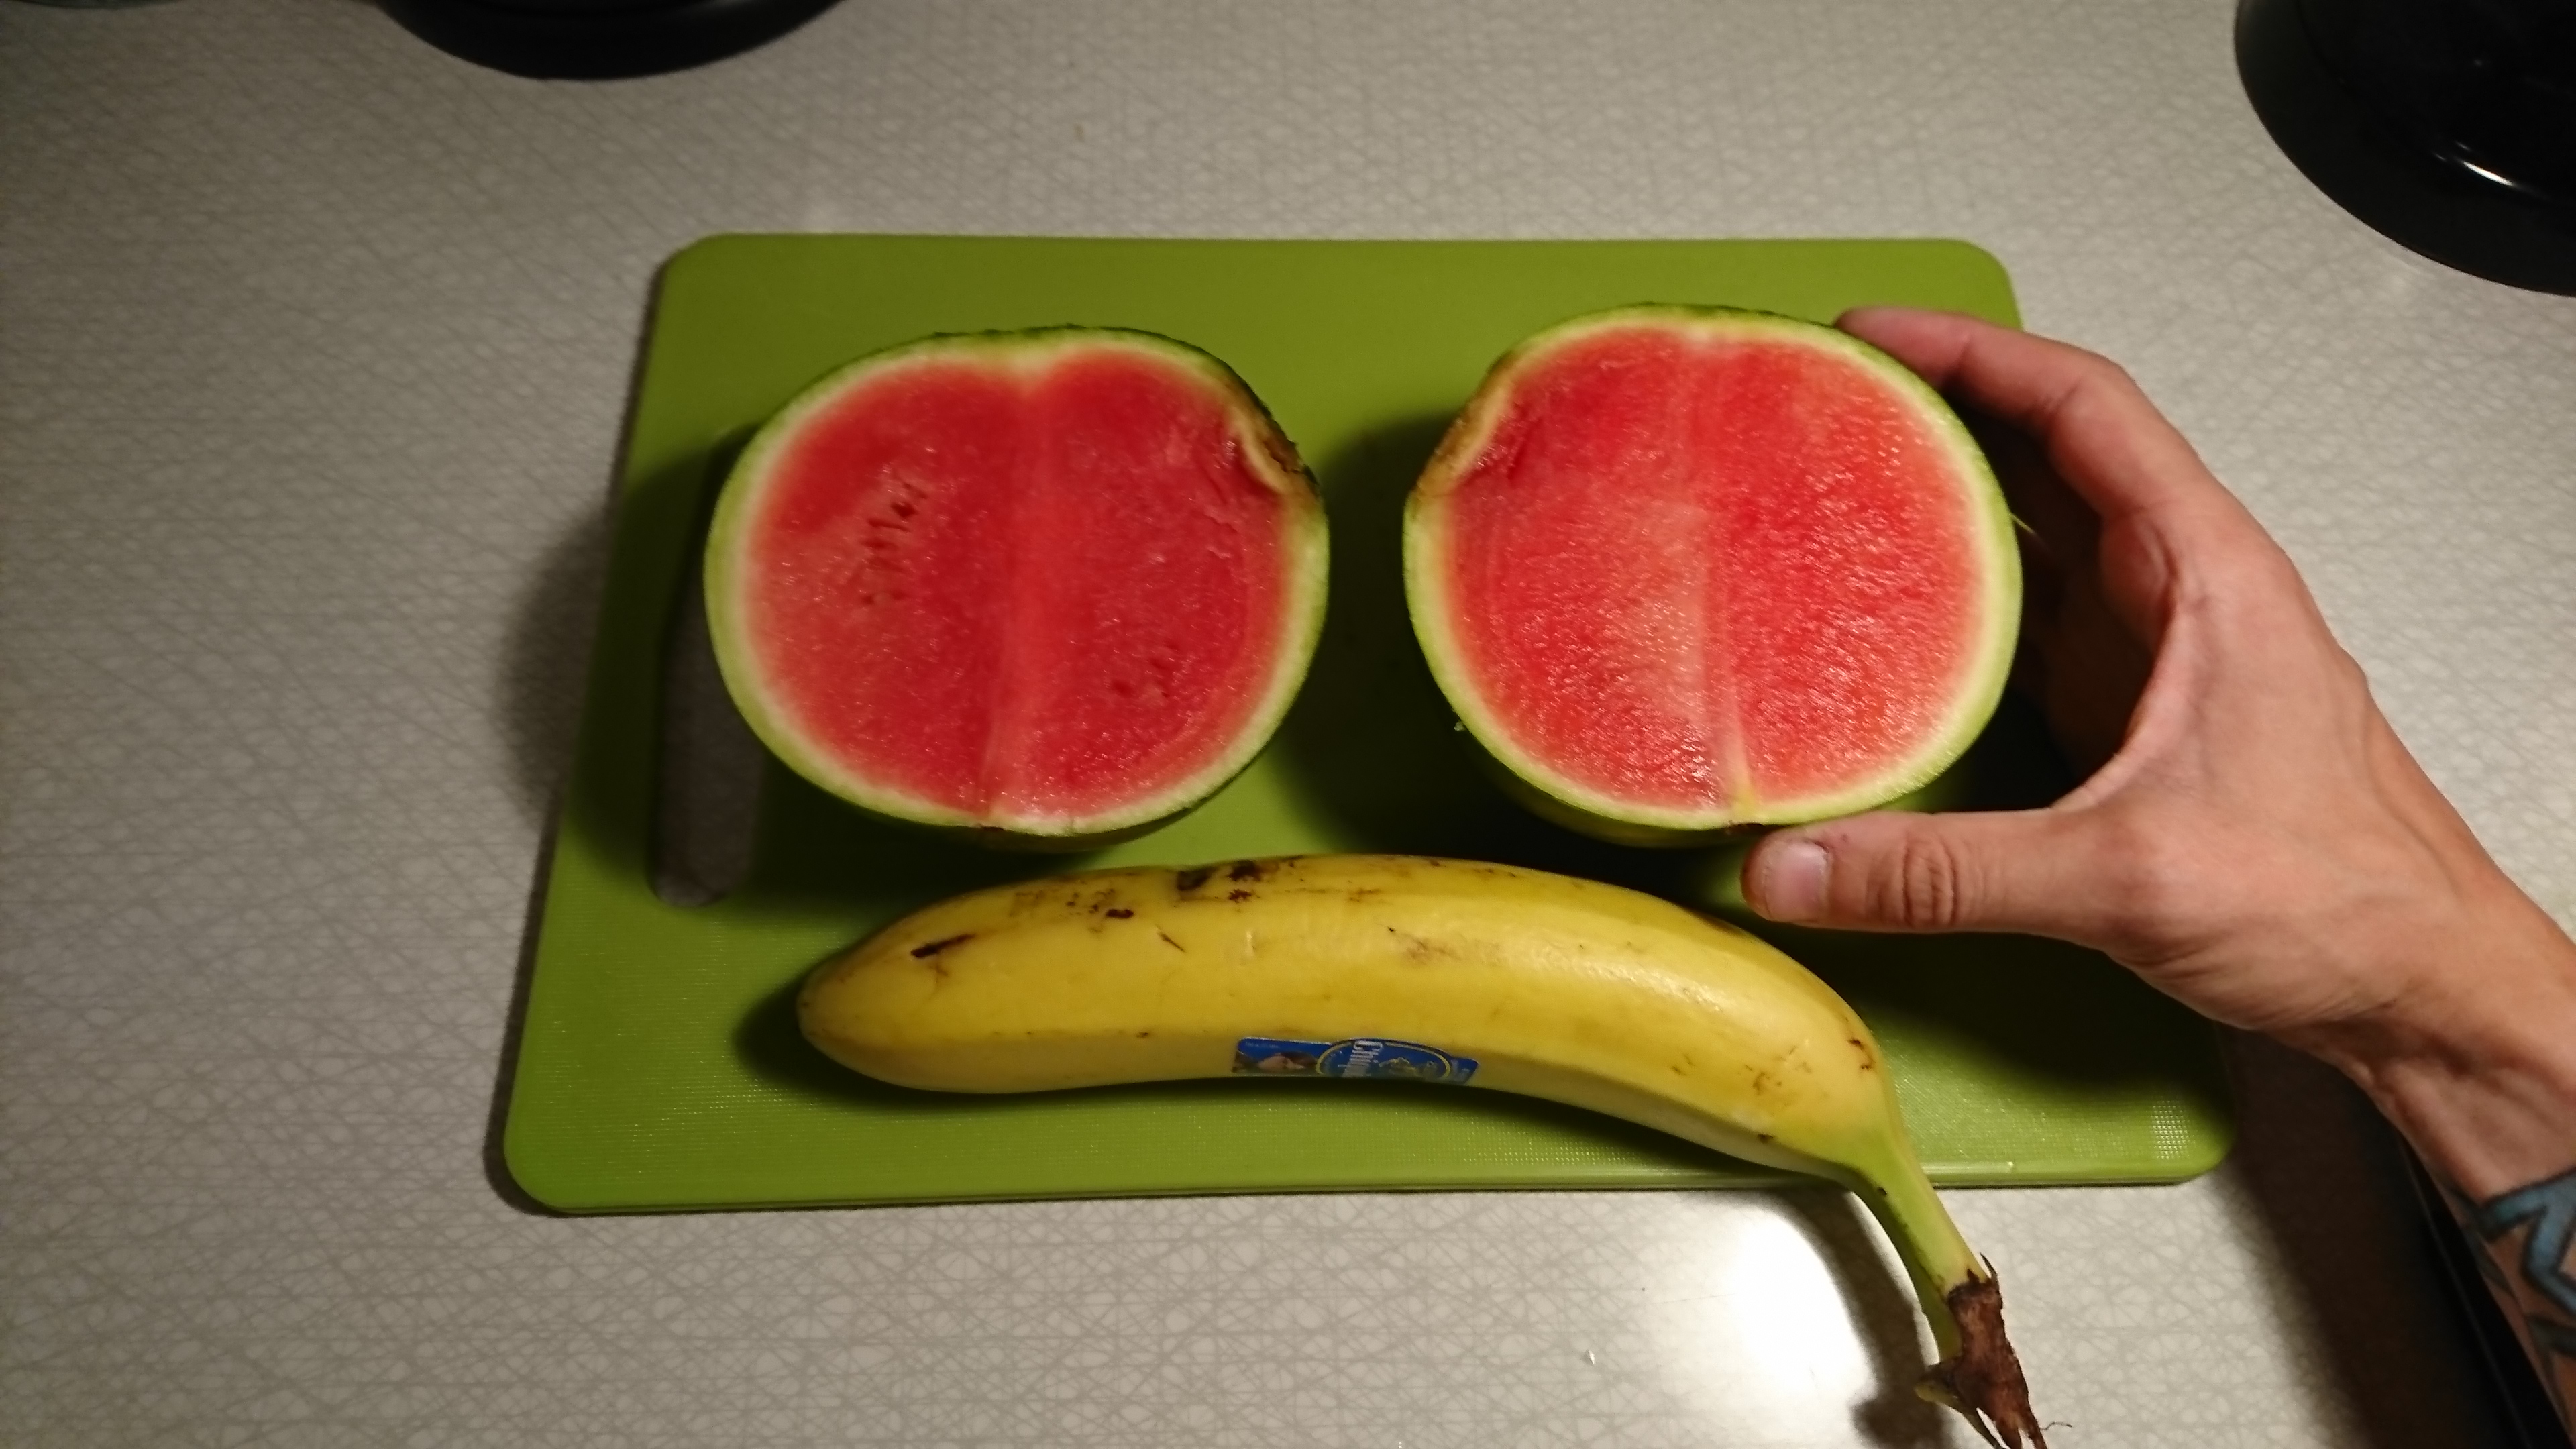 "I wanted to find out what this tiny melon looked like on the inside, oh, banana for scale again, can't forget that."